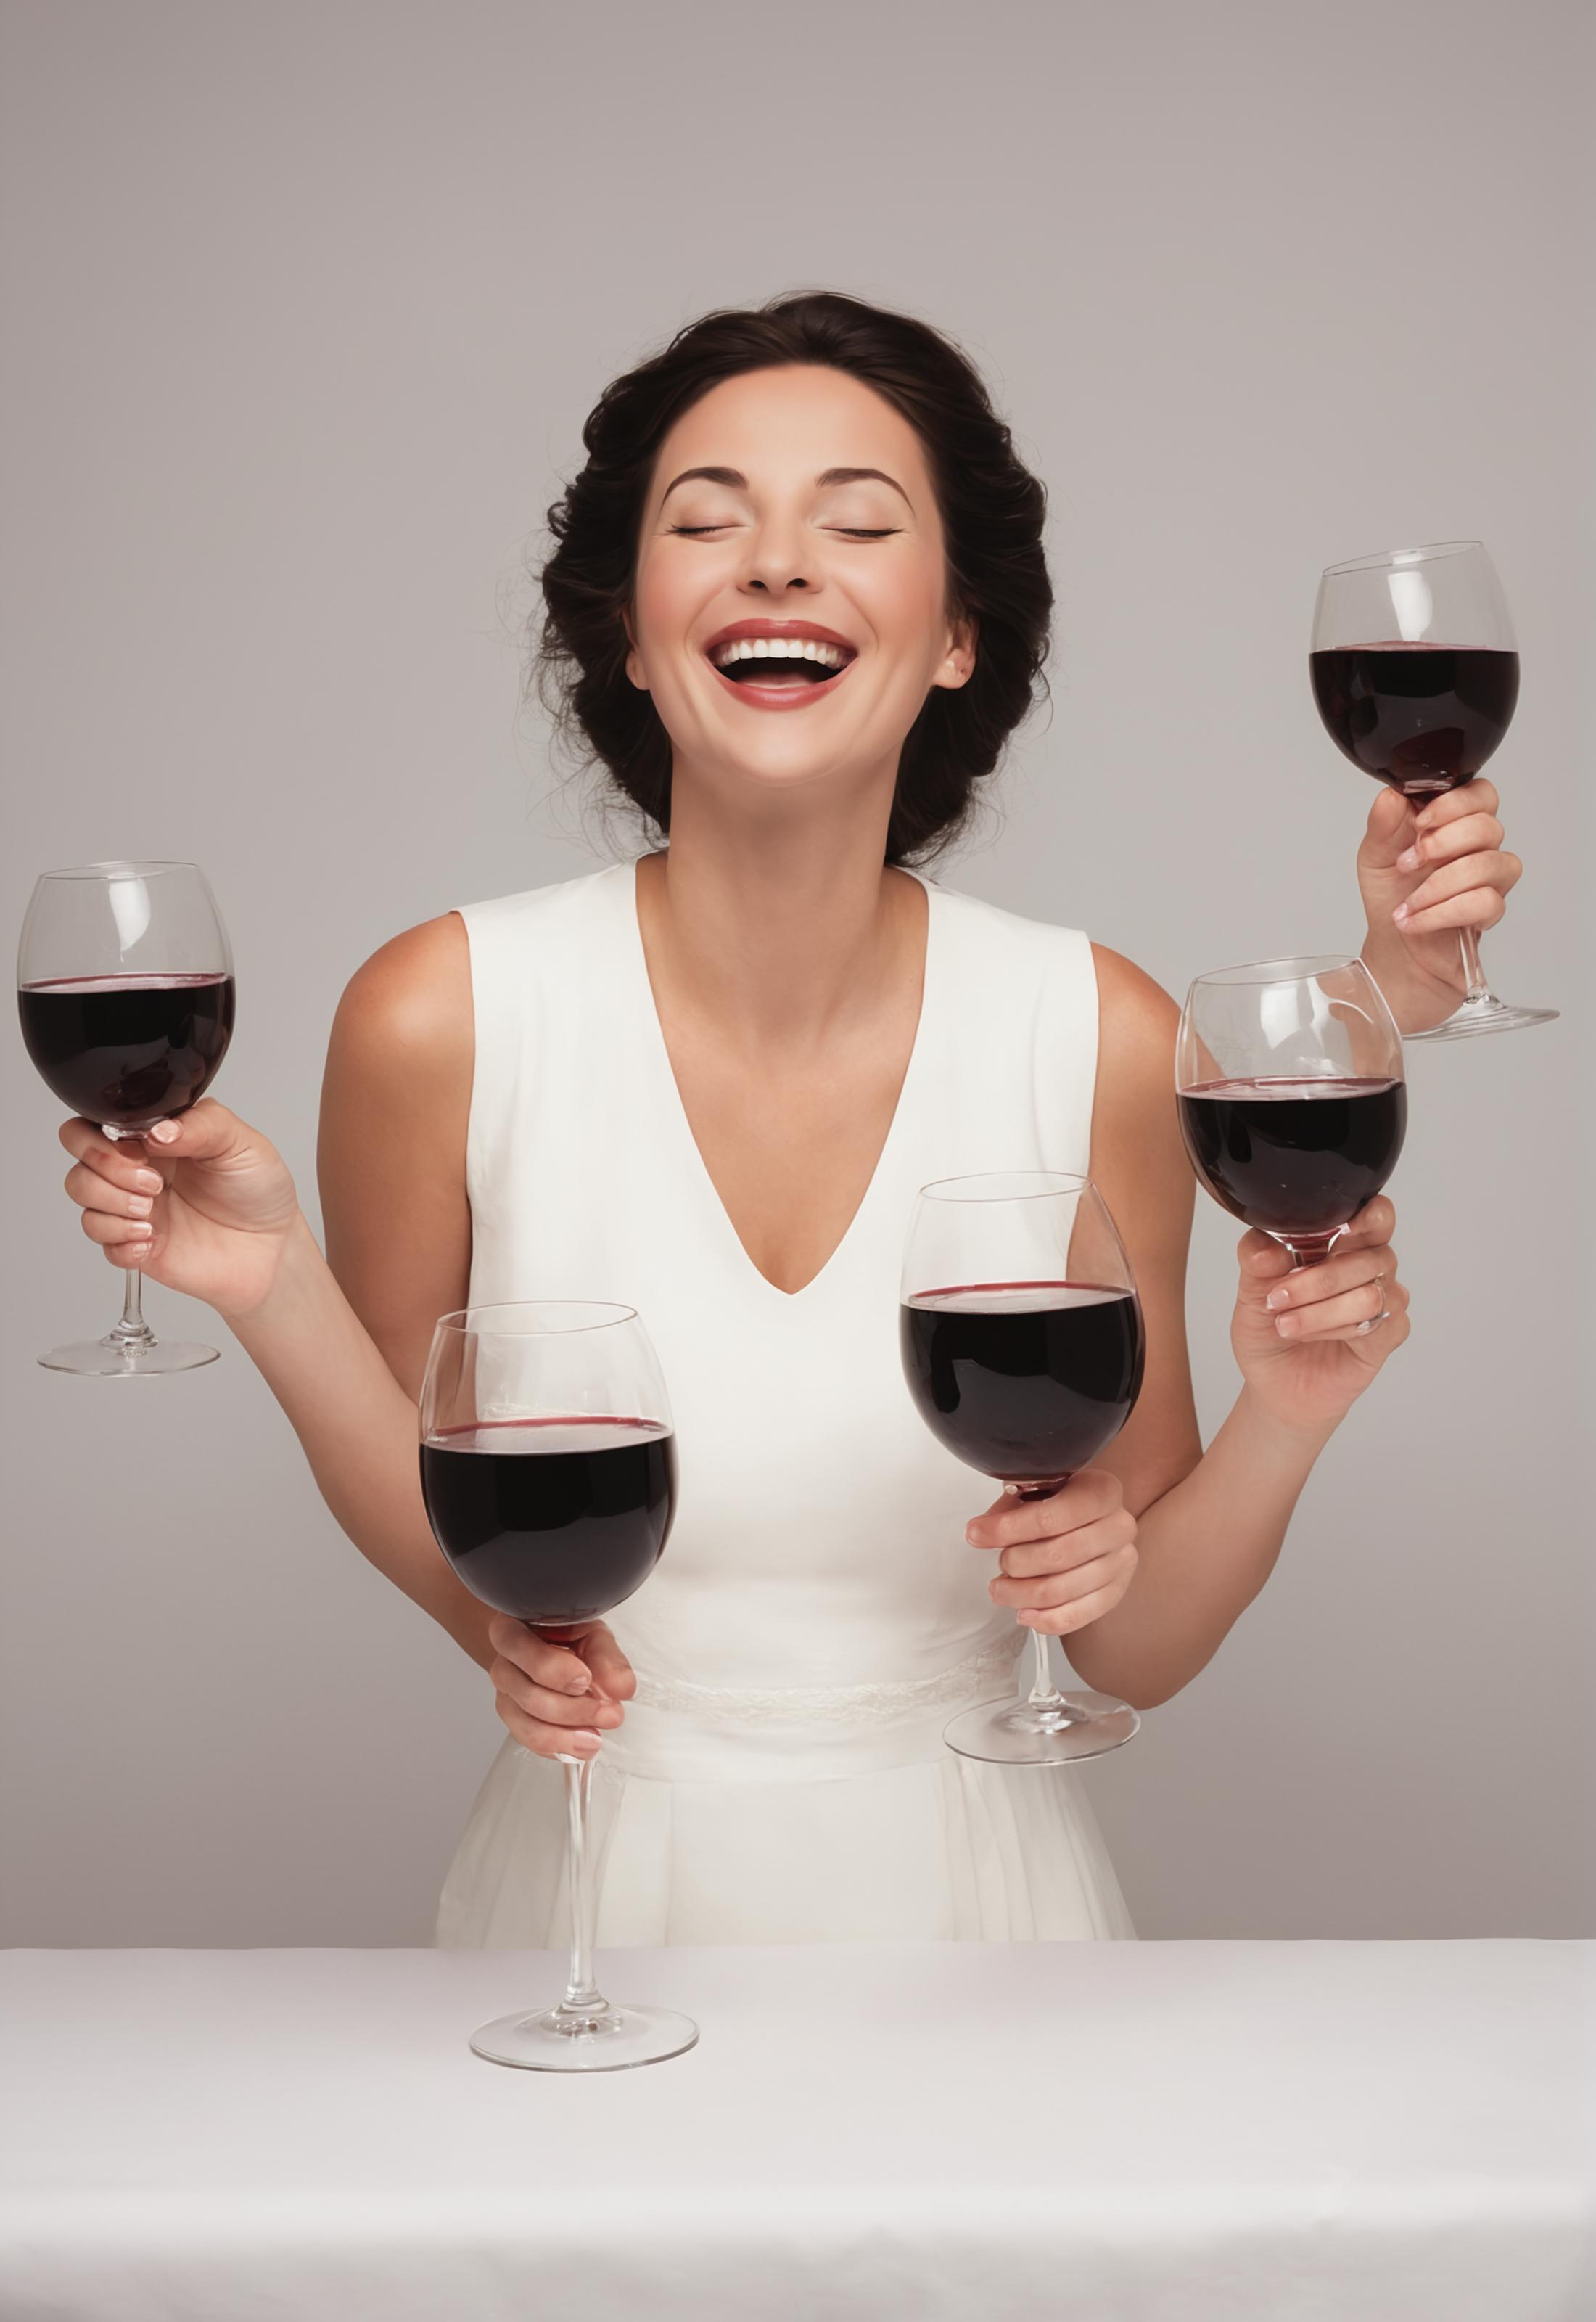 A woman holding three glasses of wine in her hands.